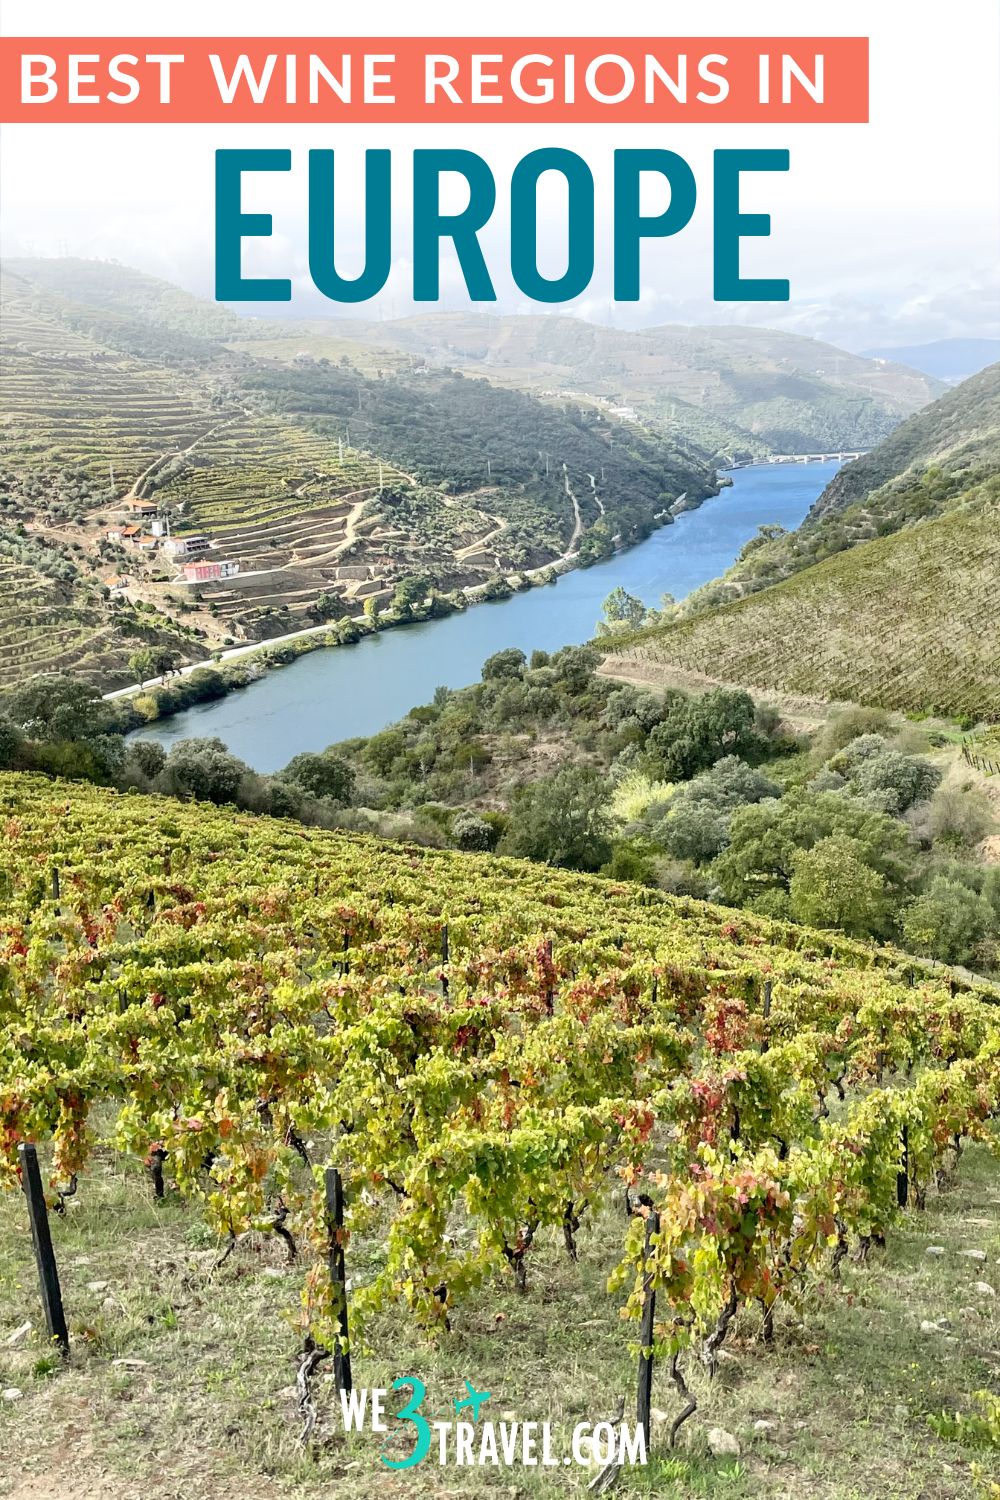 Discover the best wine regions of Europe, from well-known destinations like Tuscany and Bordeaux to hidden gems like Lavaux and Moravia.